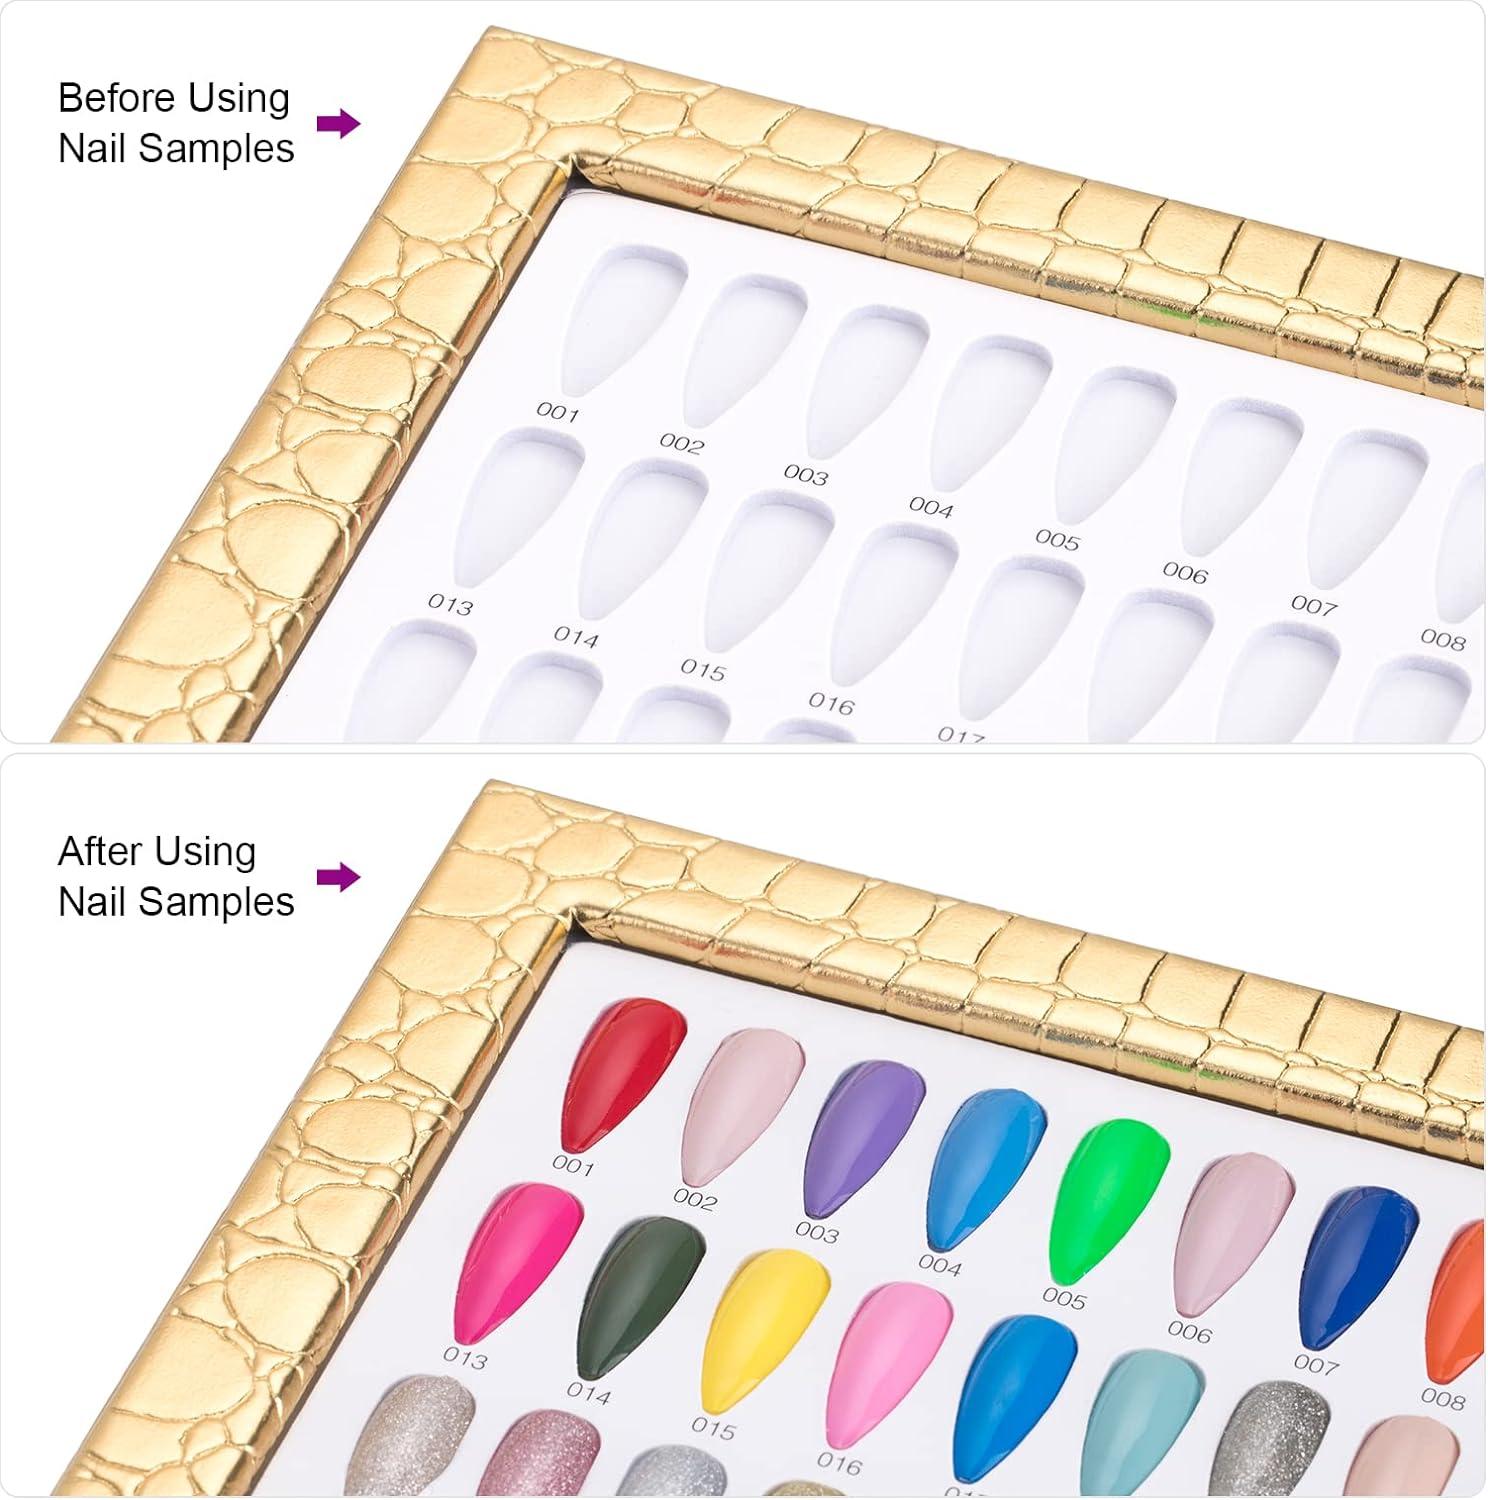 216 nail colour display graphic, gel nail display book with 216 tips for  false nails, professional salon colour chart nail design card board :  Amazon.com.be: Beauty